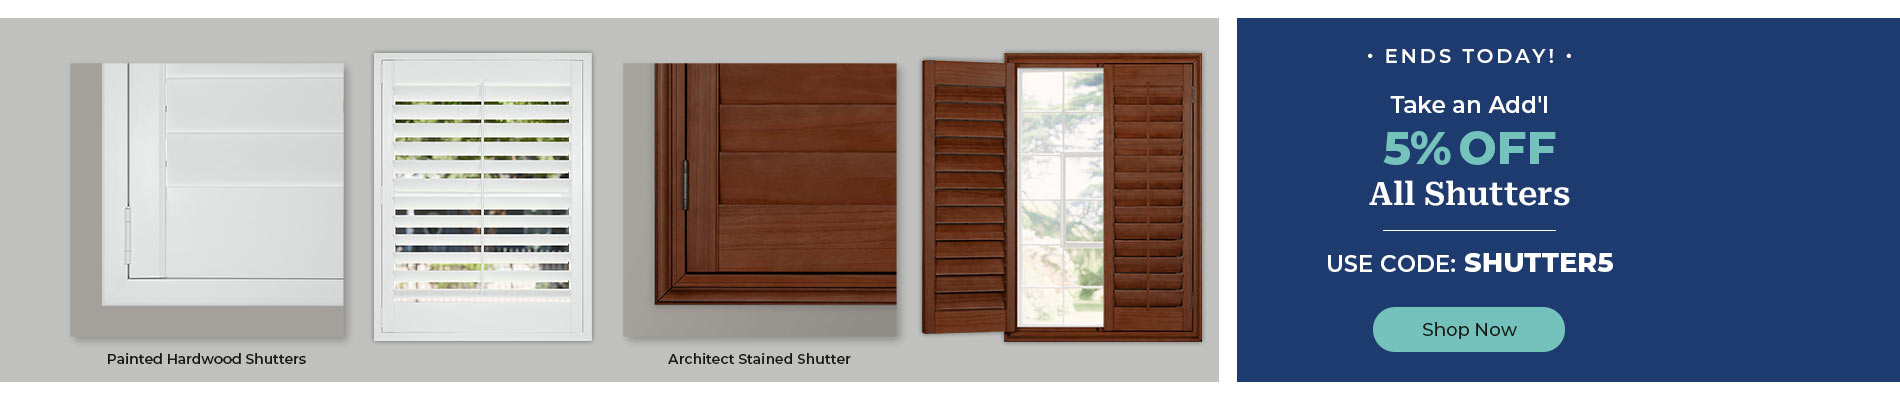 Add'l 5% off Shutters with Code SHUTTER5